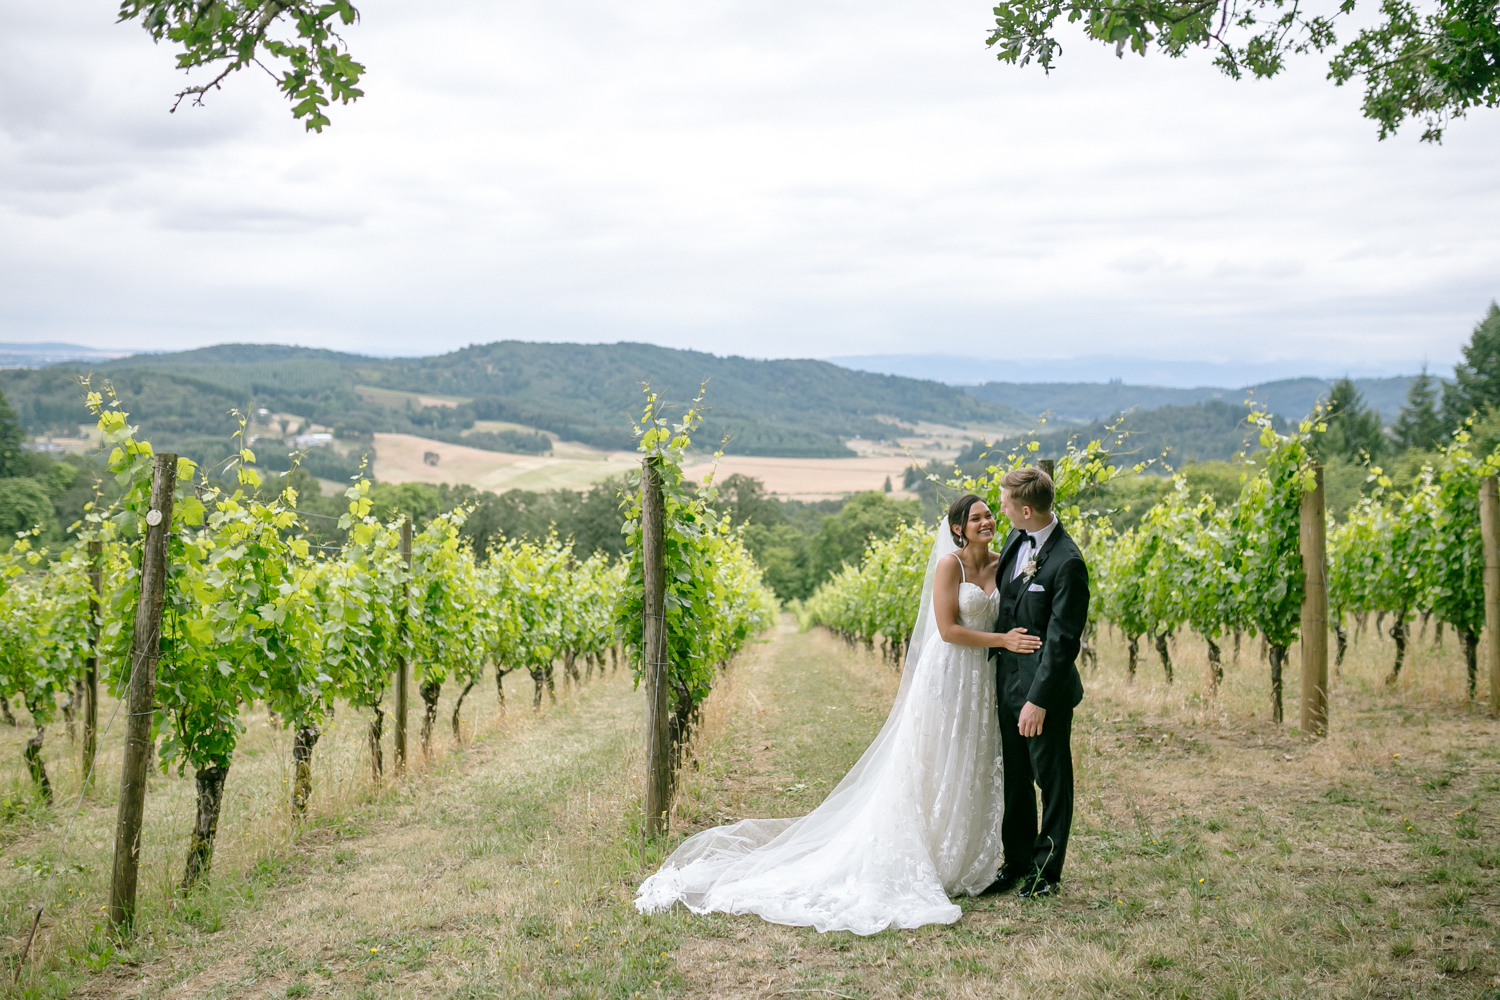 Youngberg Hill Vineyard Wedding in Wine Country Oregon - Corrie Mick Photography-43.jpg